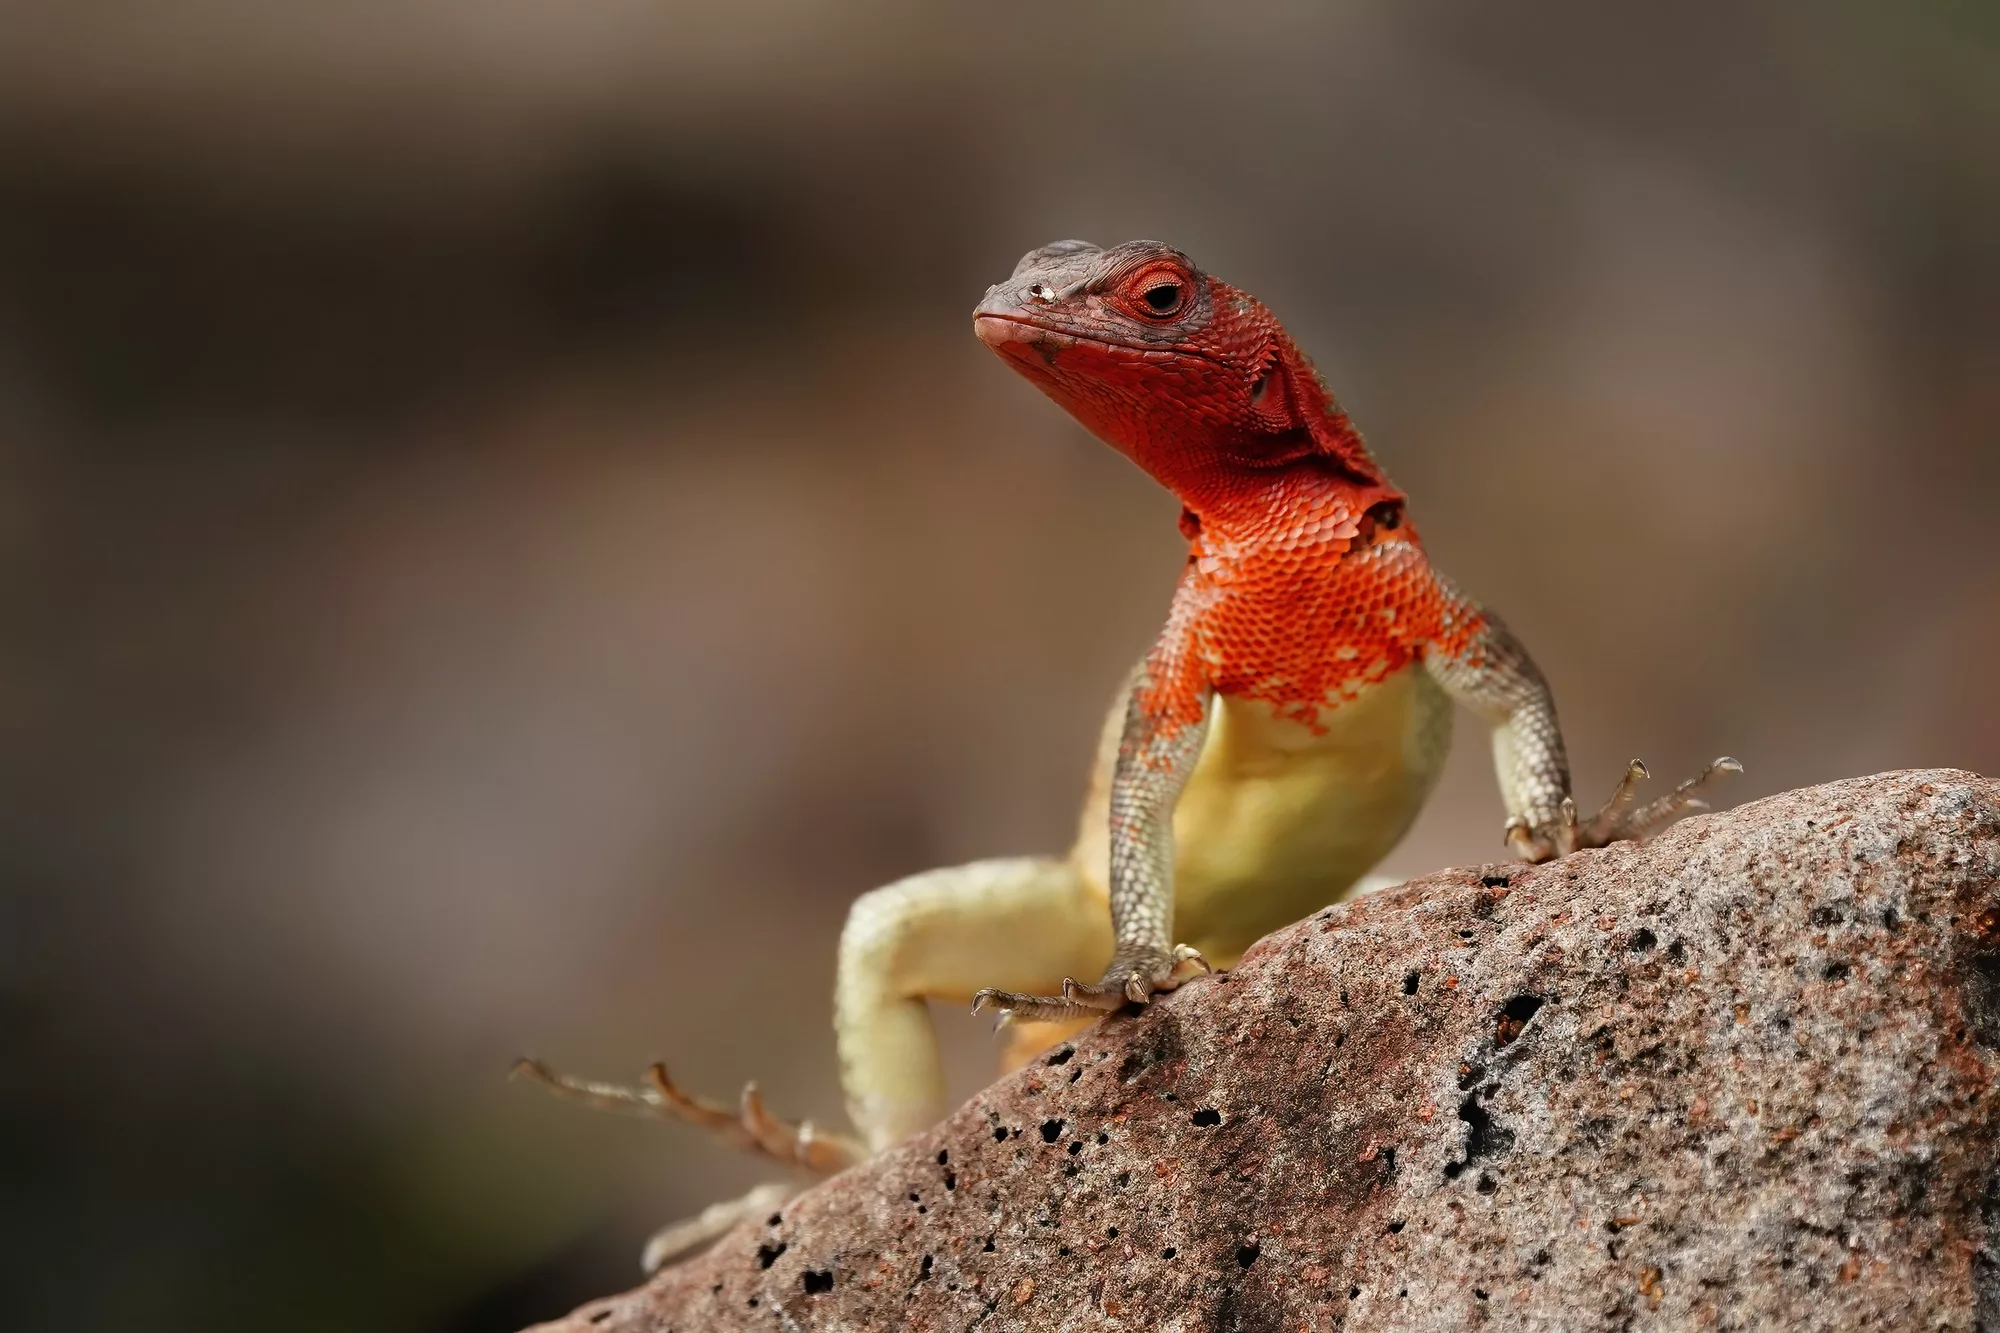 Galapagos Islands Guided Photography Experience - Lava Lizard